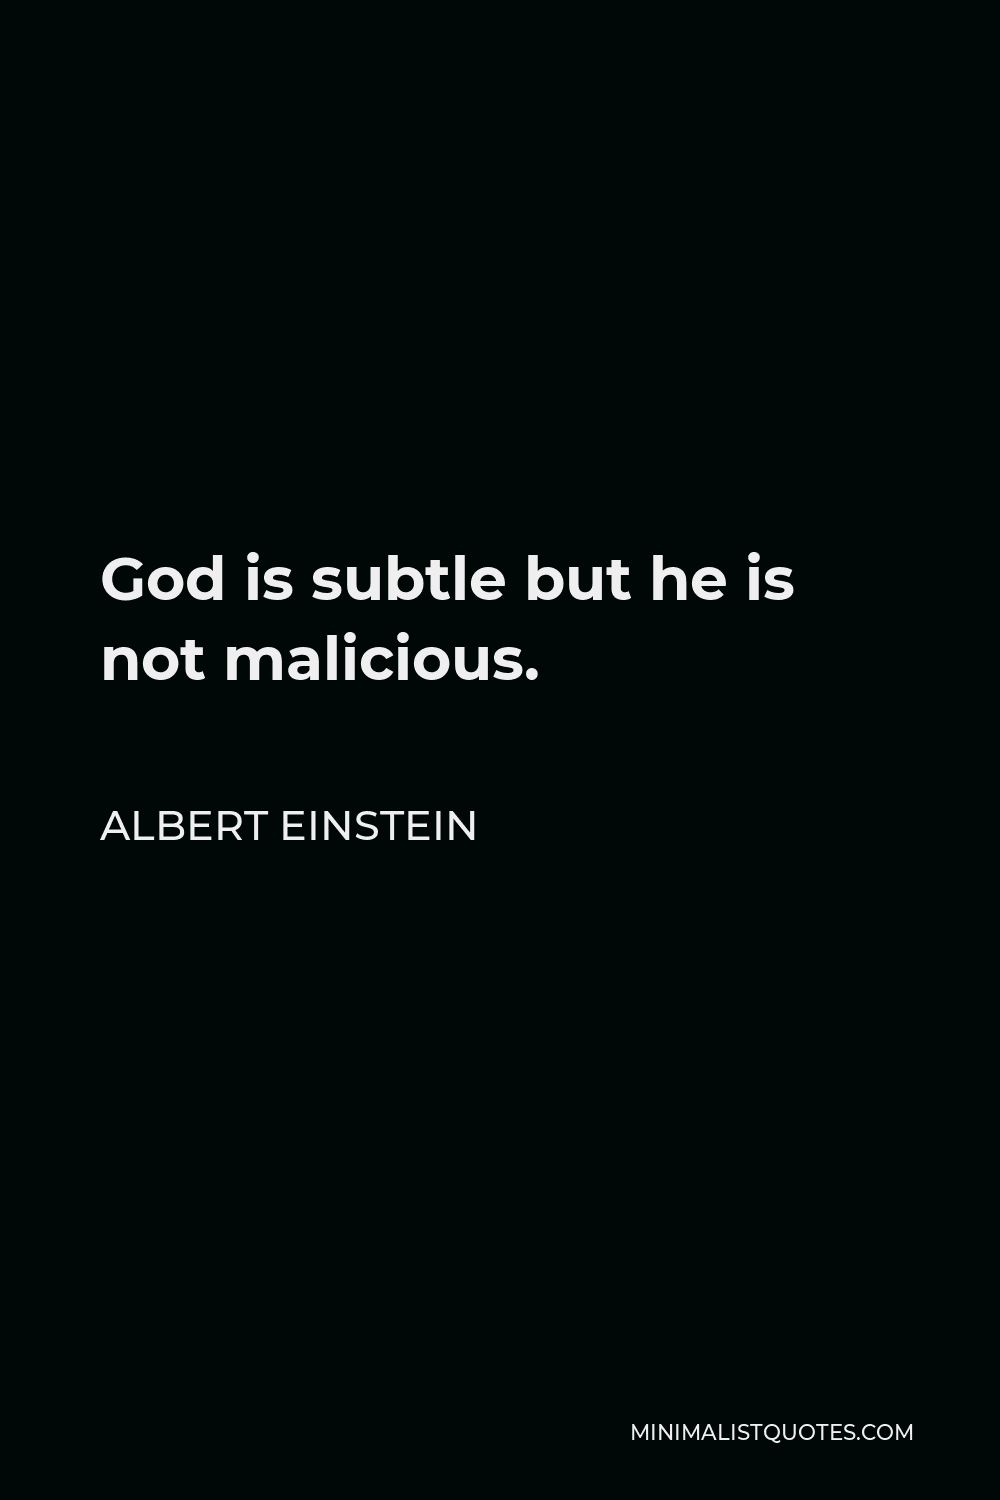 Albert Einstein Quote - God is subtle but he is not malicious.